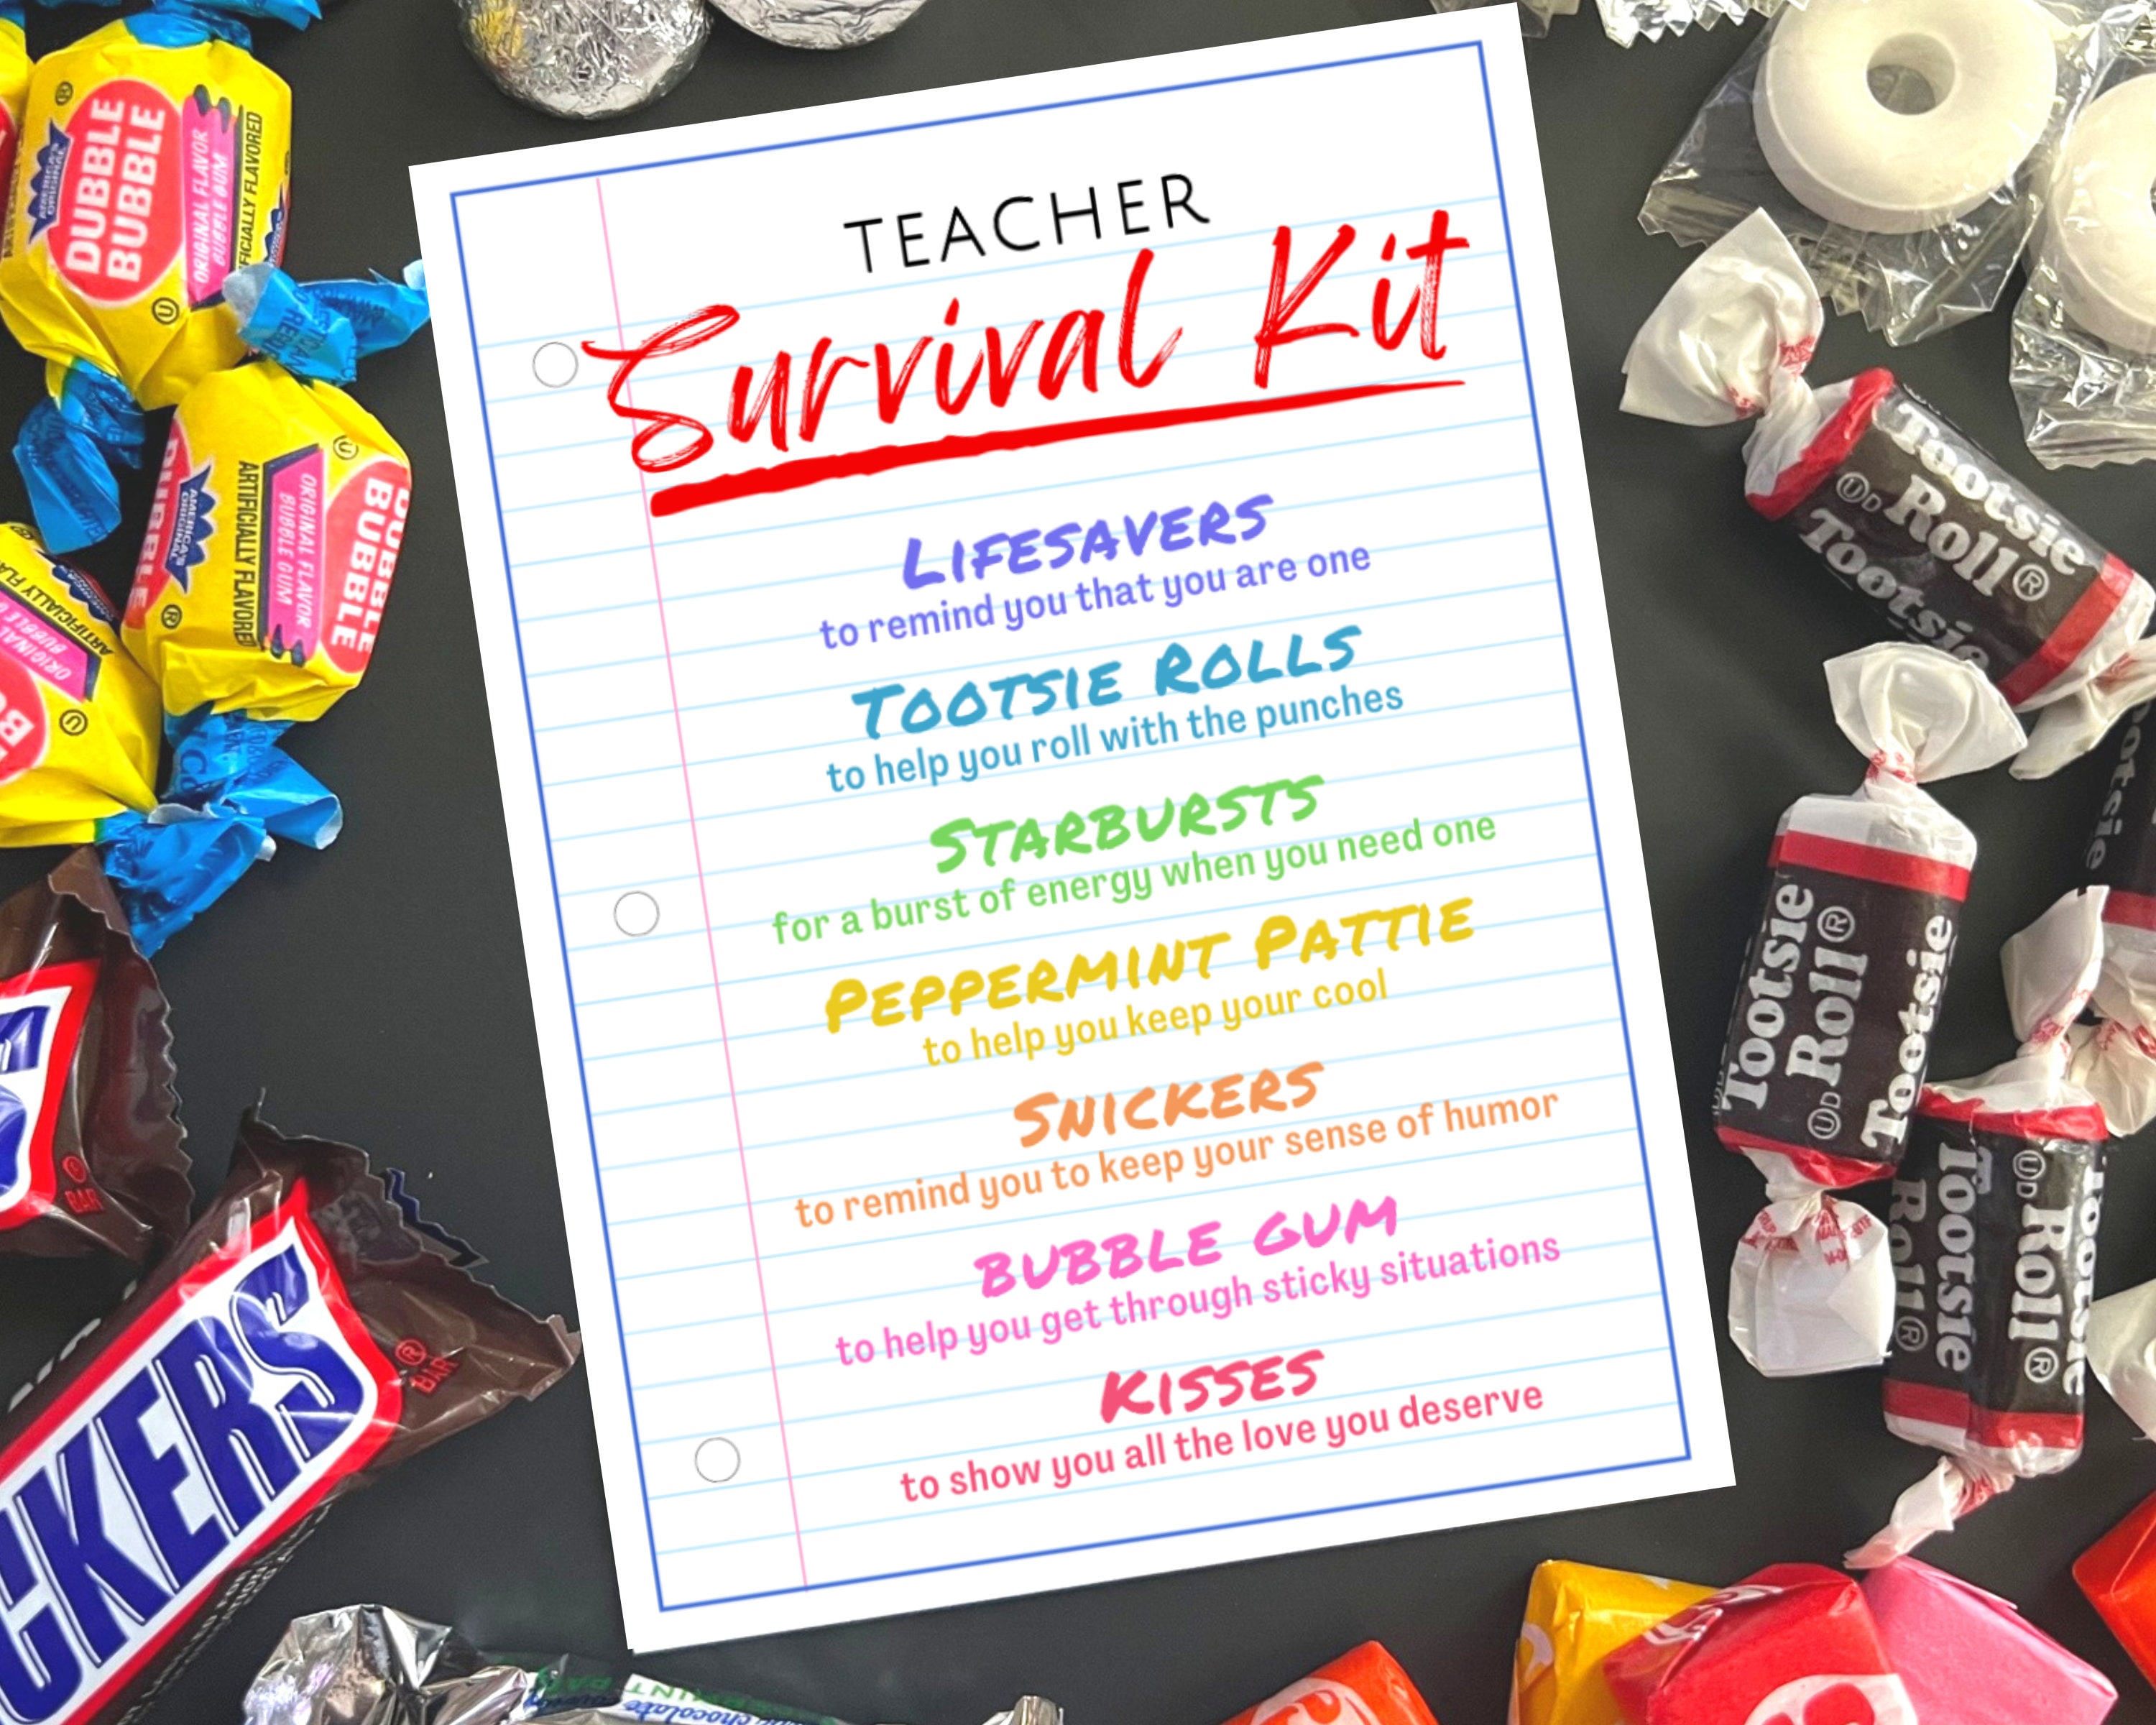 Here's Everything That Should Go in Your Teacher Survival Kit